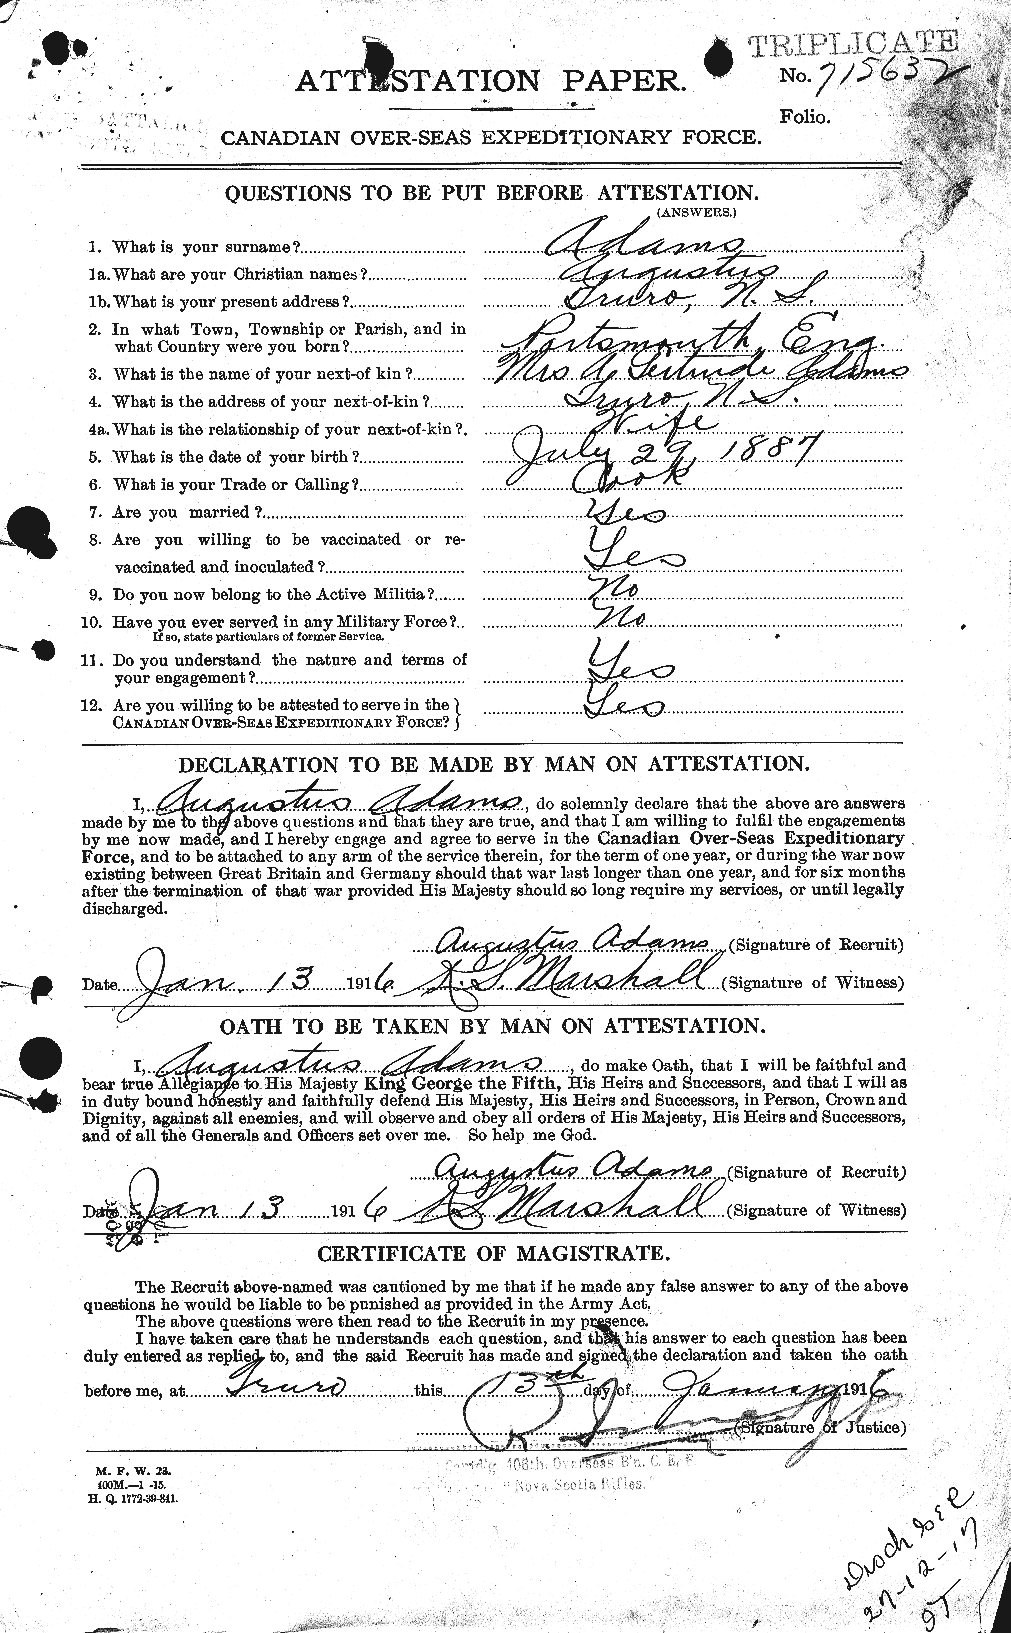 Personnel Records of the First World War - CEF 202033a